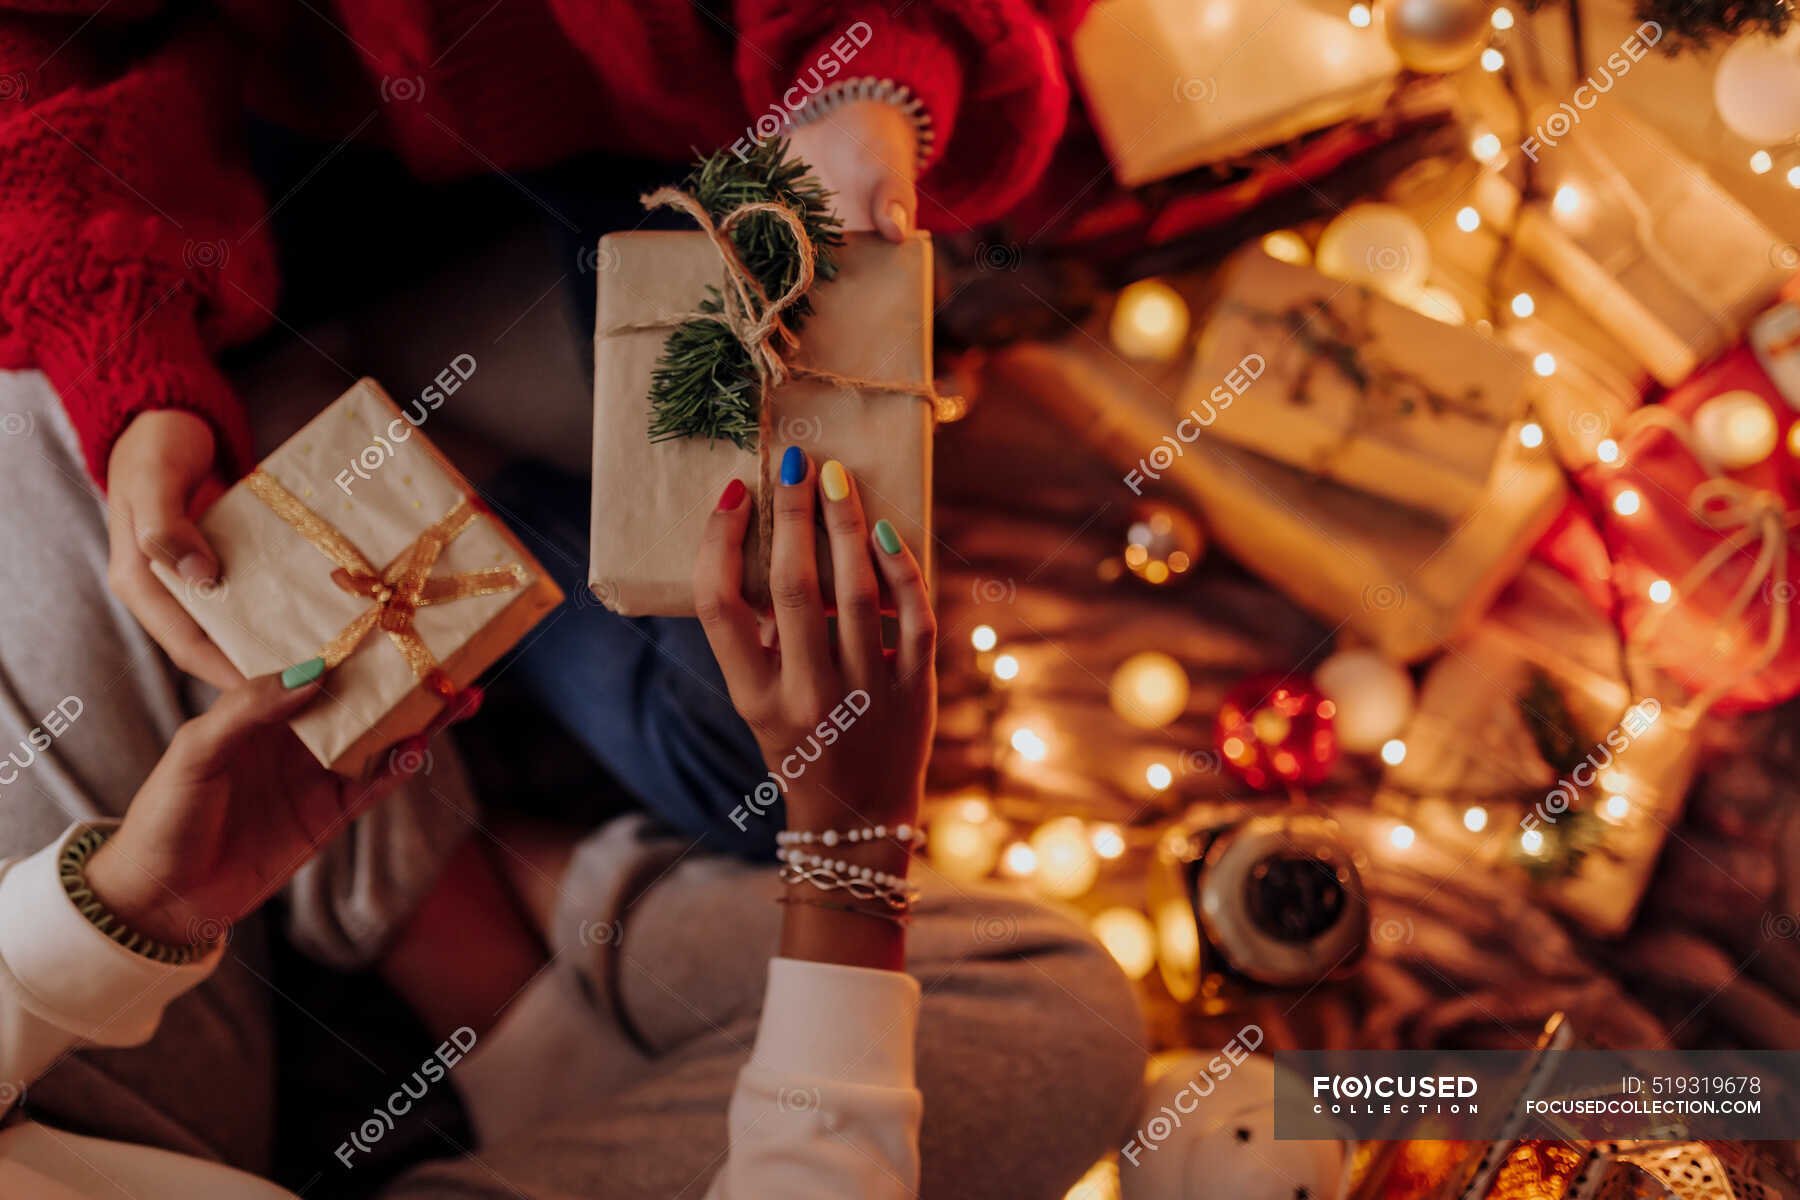 Female friends giving gifts to each other in room Vector Image